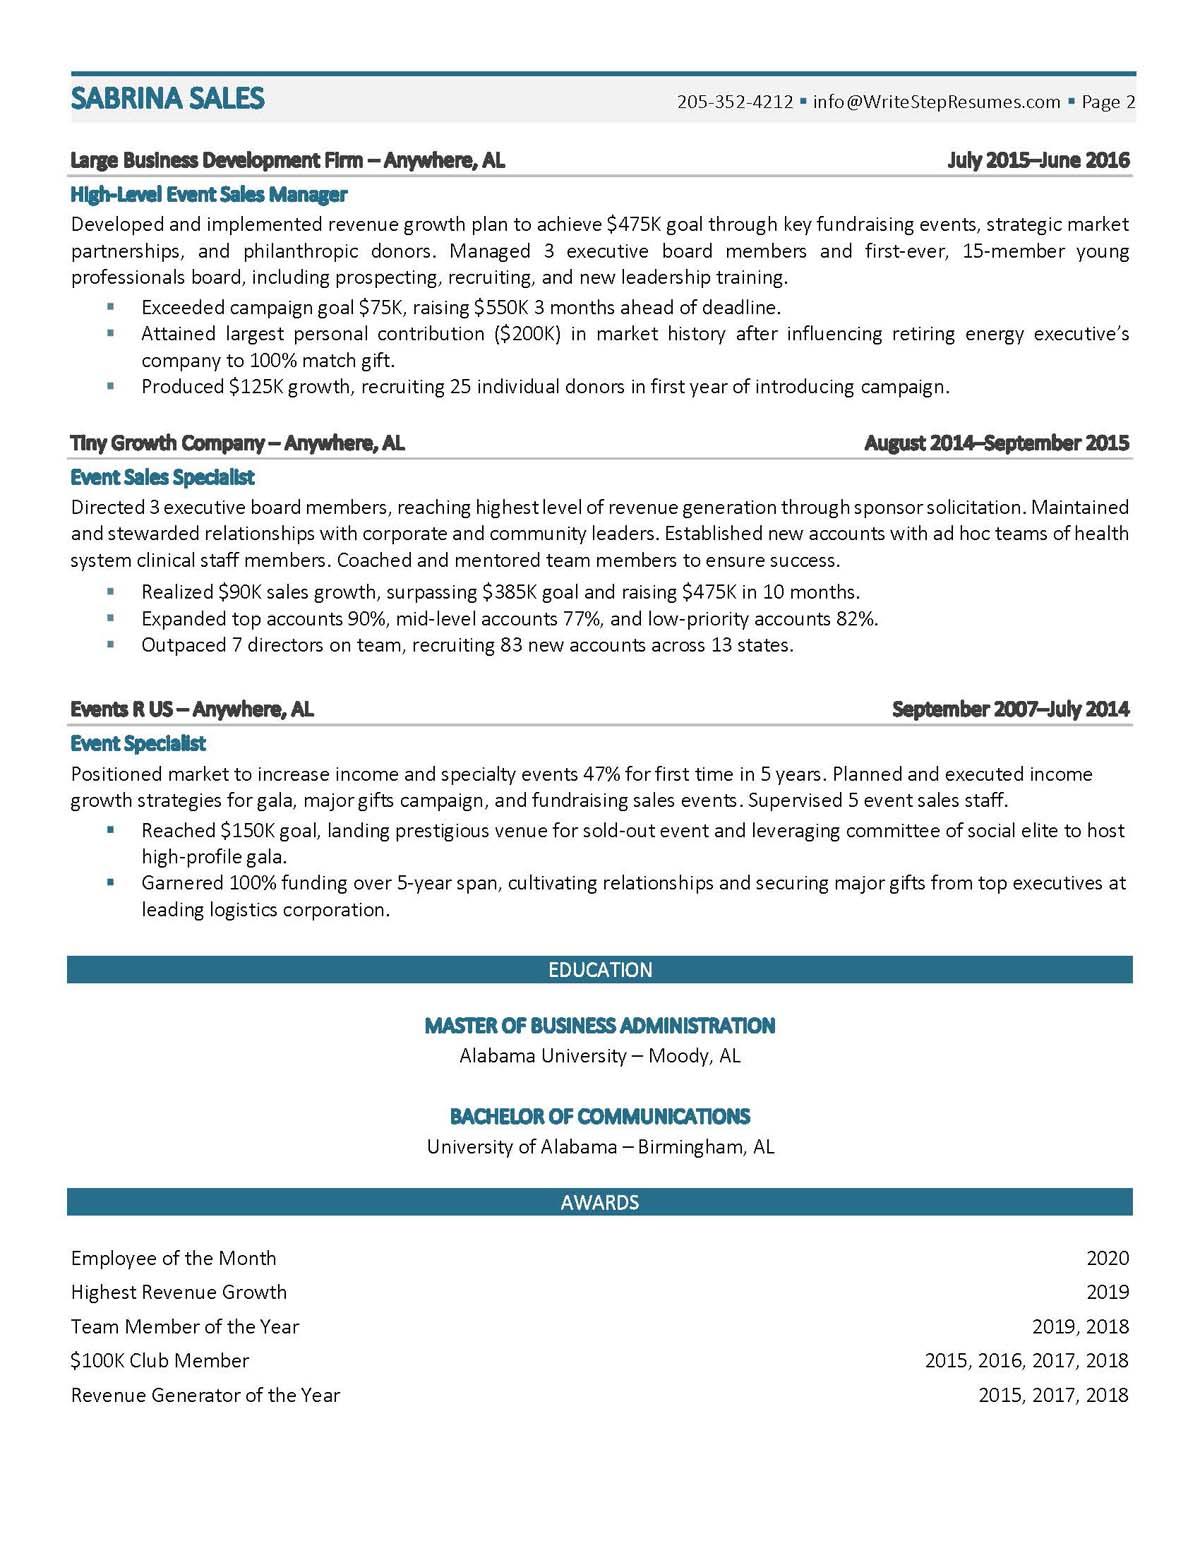 Sample resume: Sales, Mid Experience, Chronological